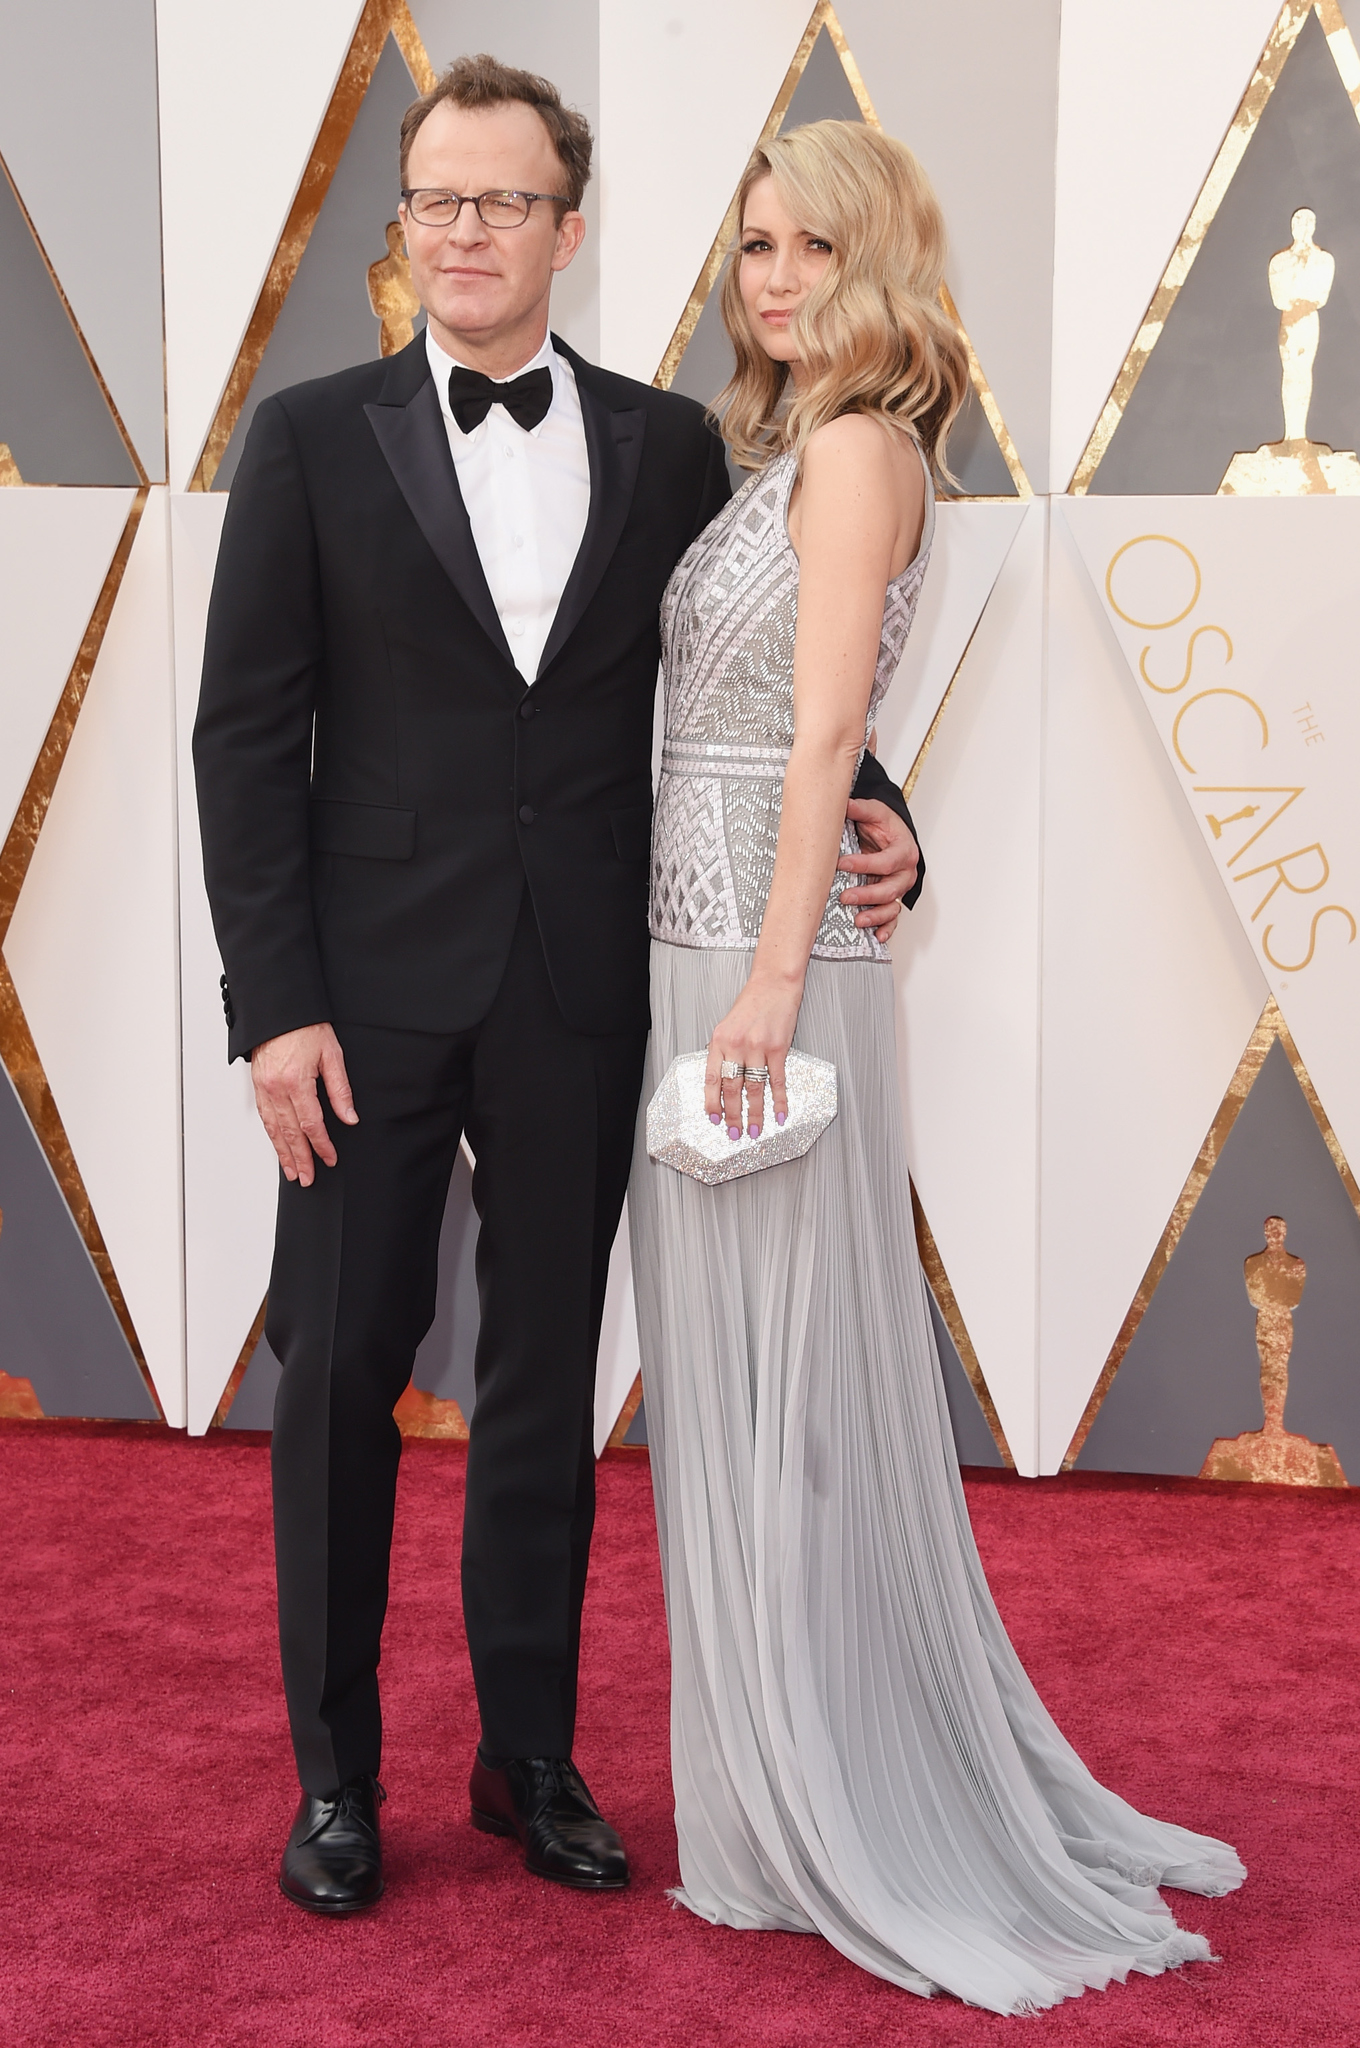 Tom McCarthy and Wendy Merry at event of The Oscars (2016)